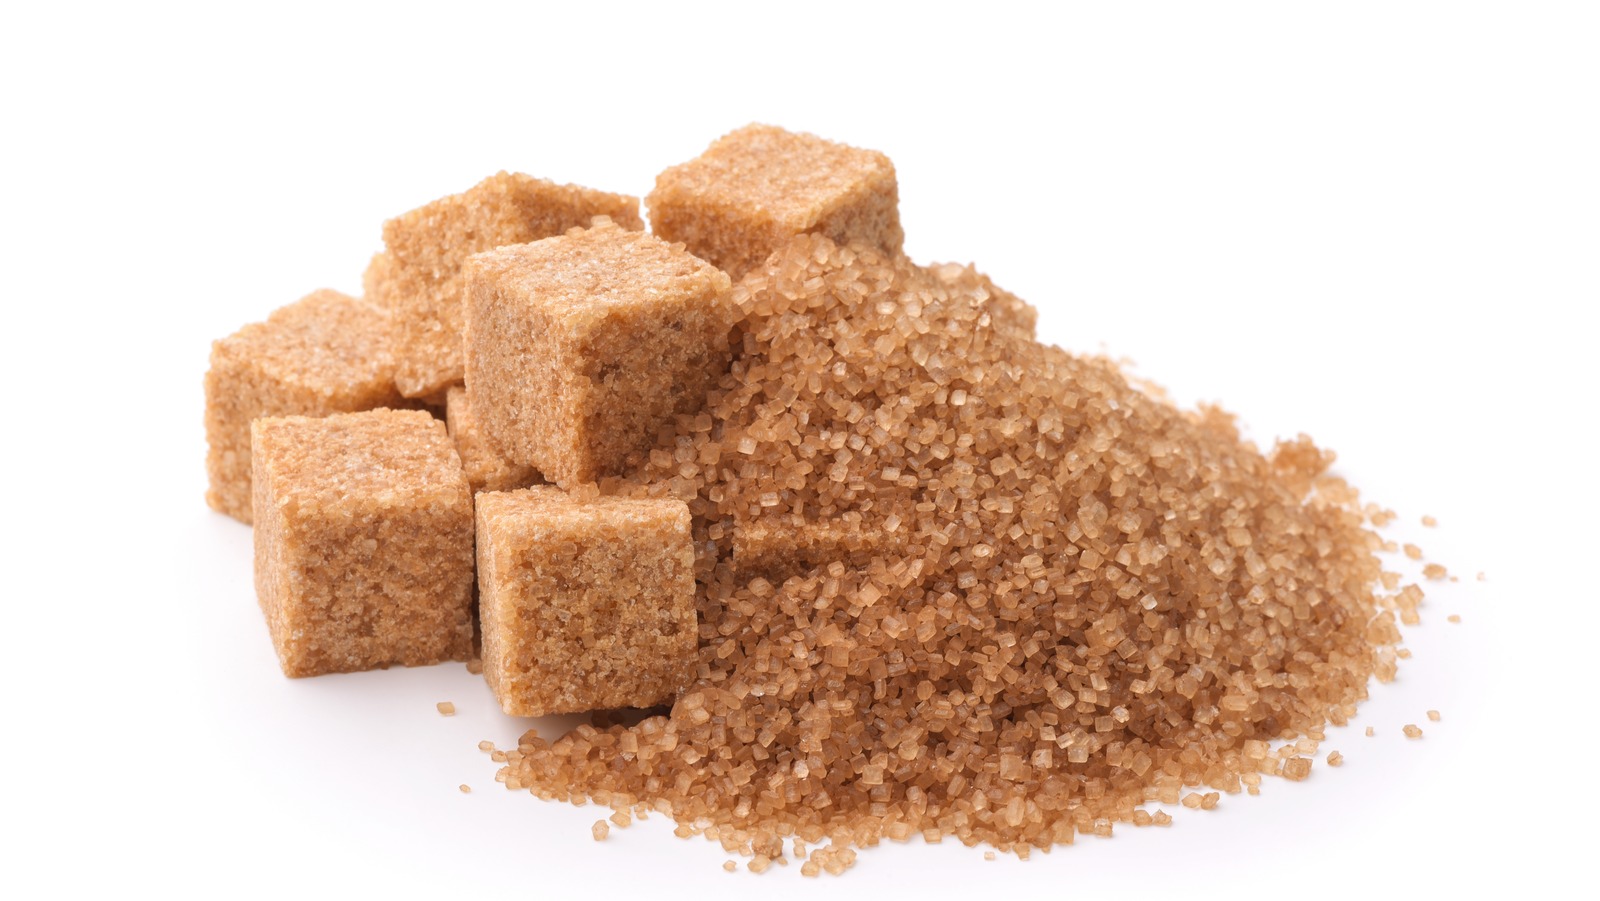 https://www.thedailymeal.com/img/gallery/you-should-never-store-brown-sugar-in-the-fridge-heres-why/l-intro-1673892283.jpg